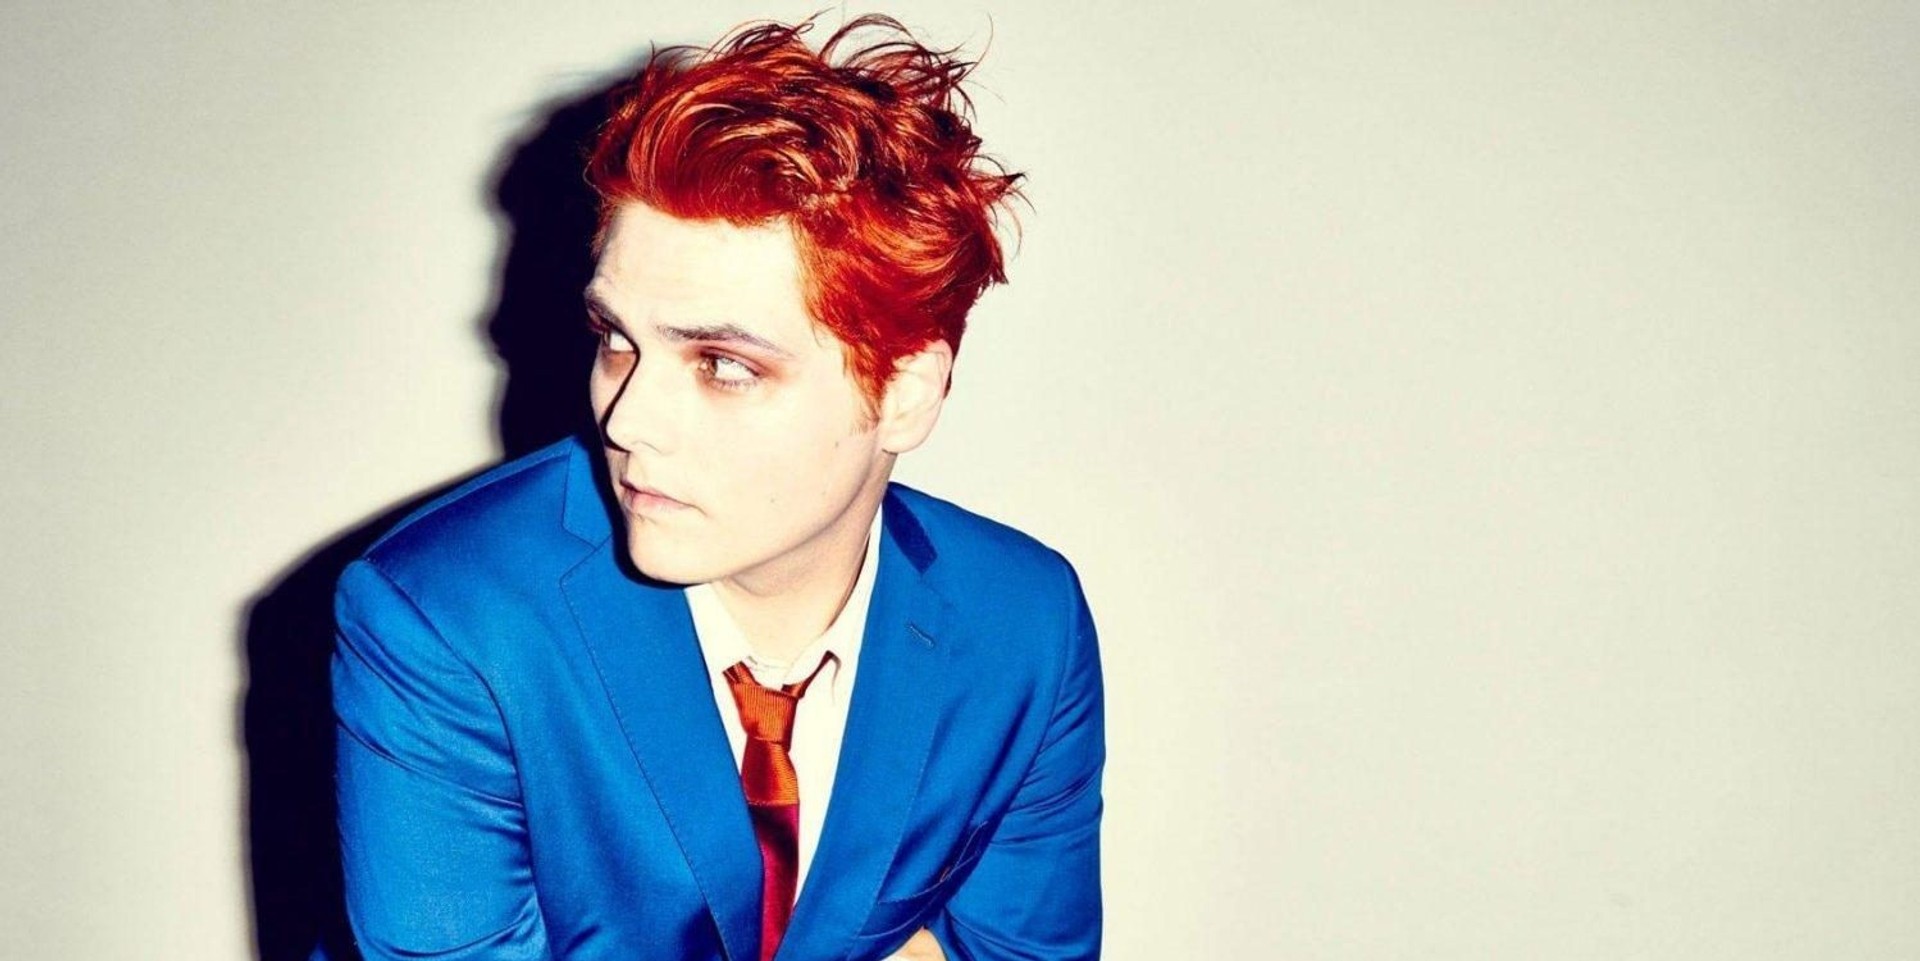 My Chemical Romance frontman Gerard Way releases new track 'Baby You're A Haunted House' – listen